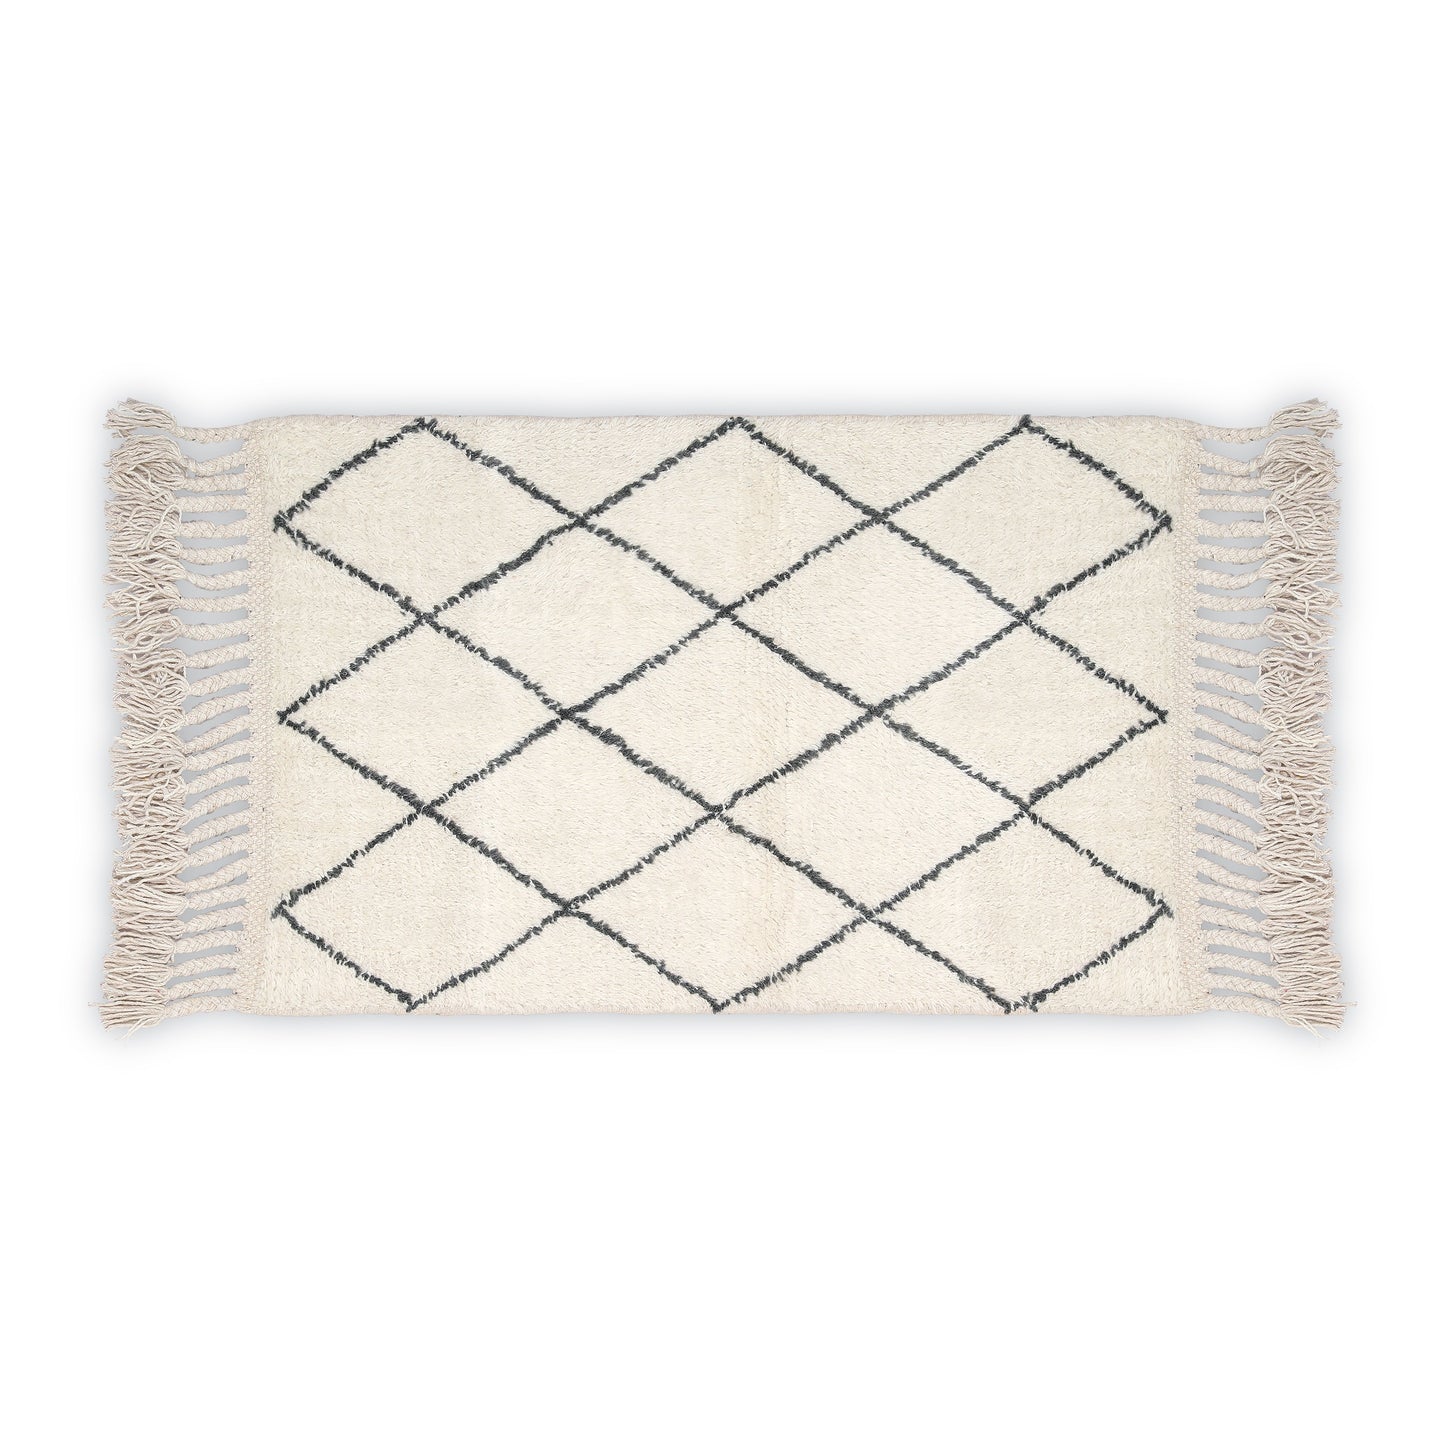 Hand Woven Wool Area Rug  Woven Harlequin White Black 1228